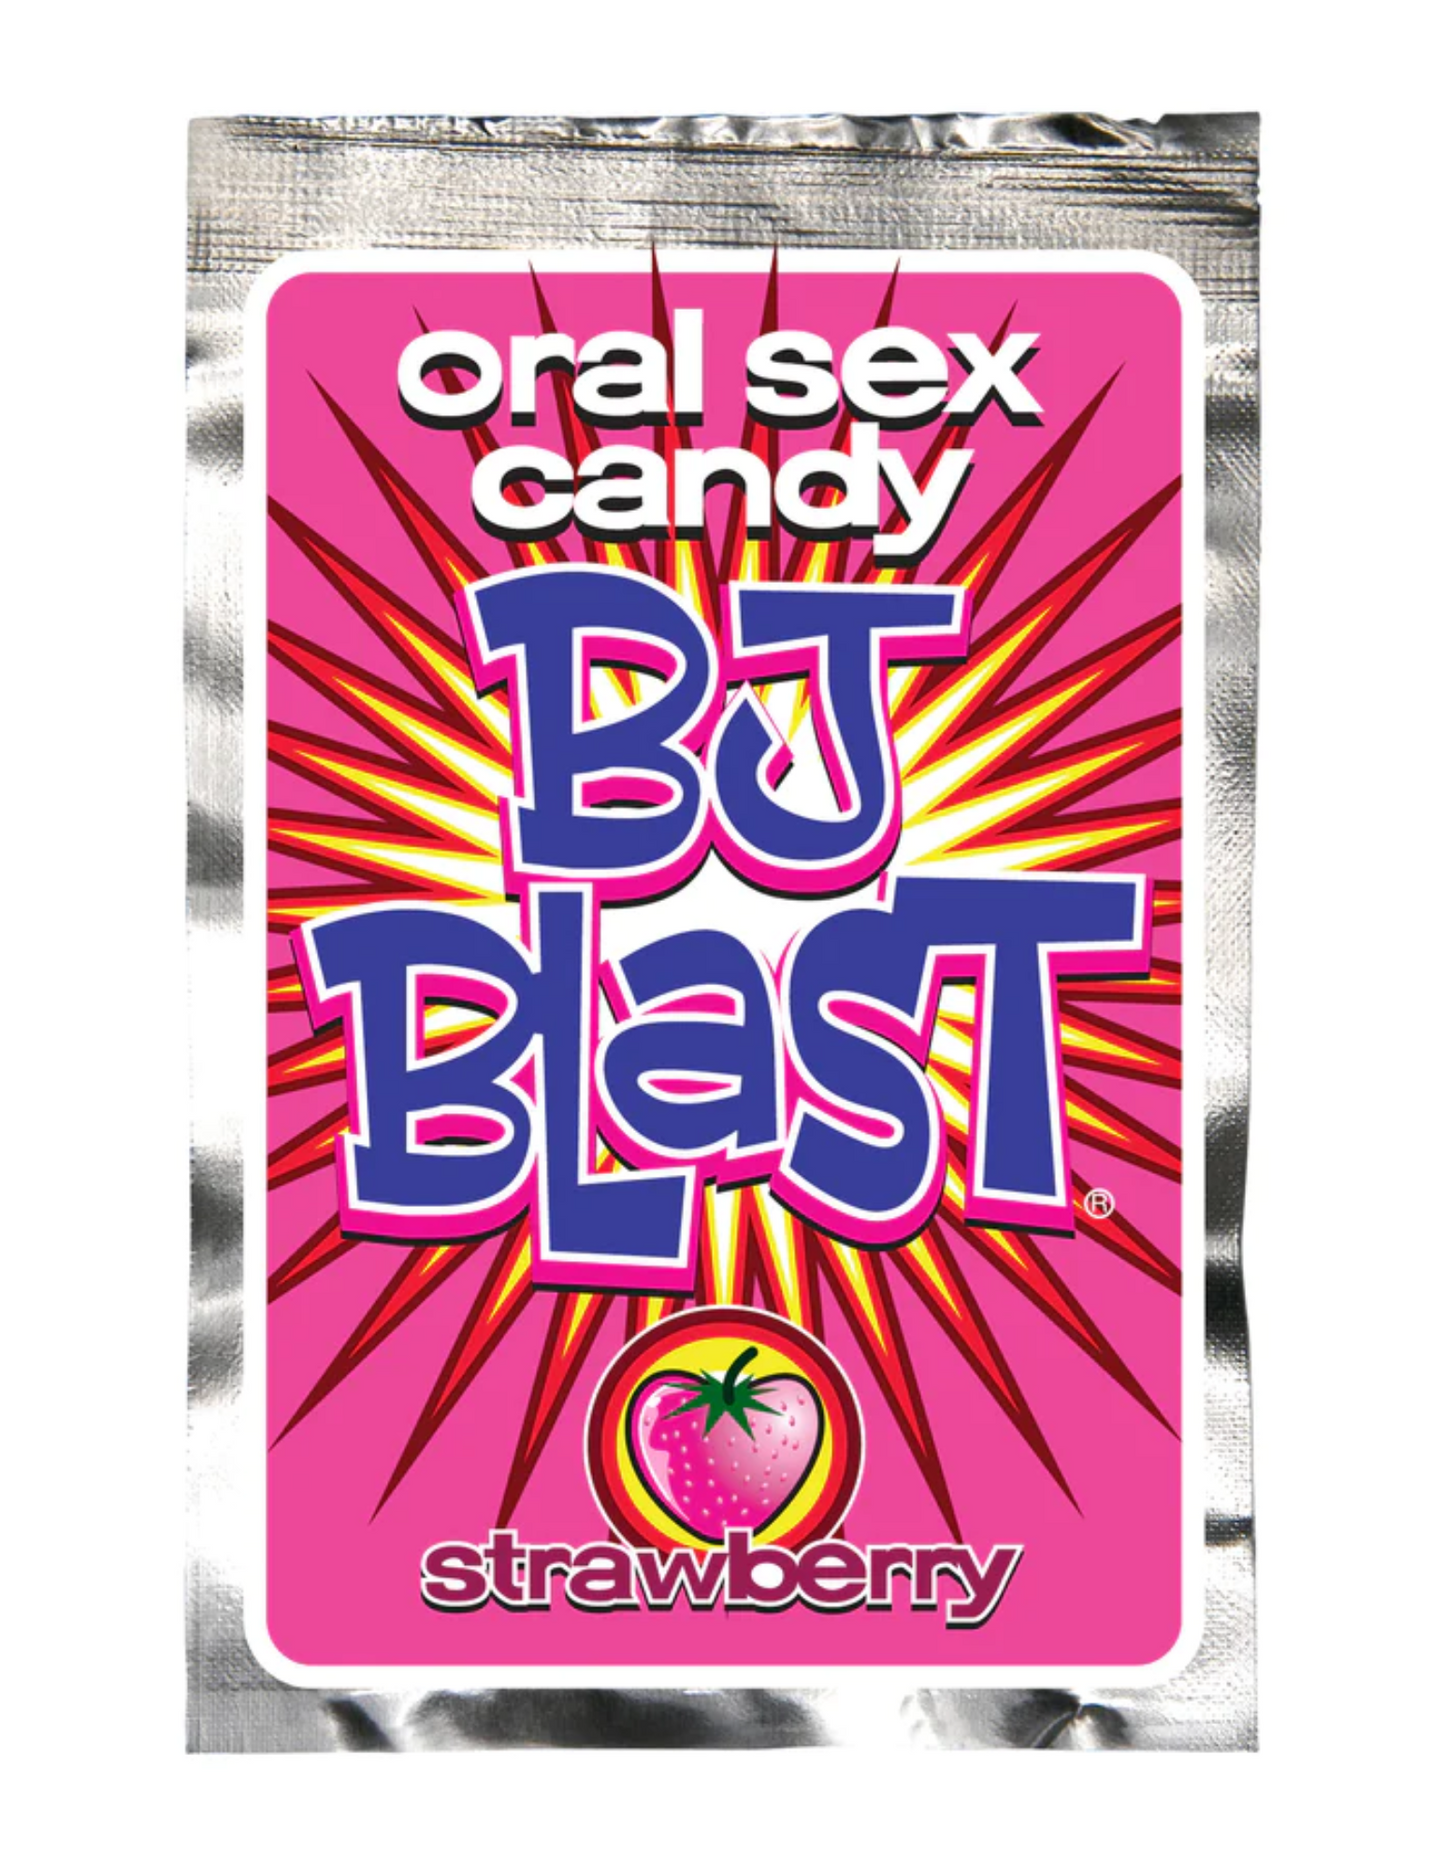 Photo shows the Strawberry flavor BJ Blast Oral Sex Candy from Pipedreams.